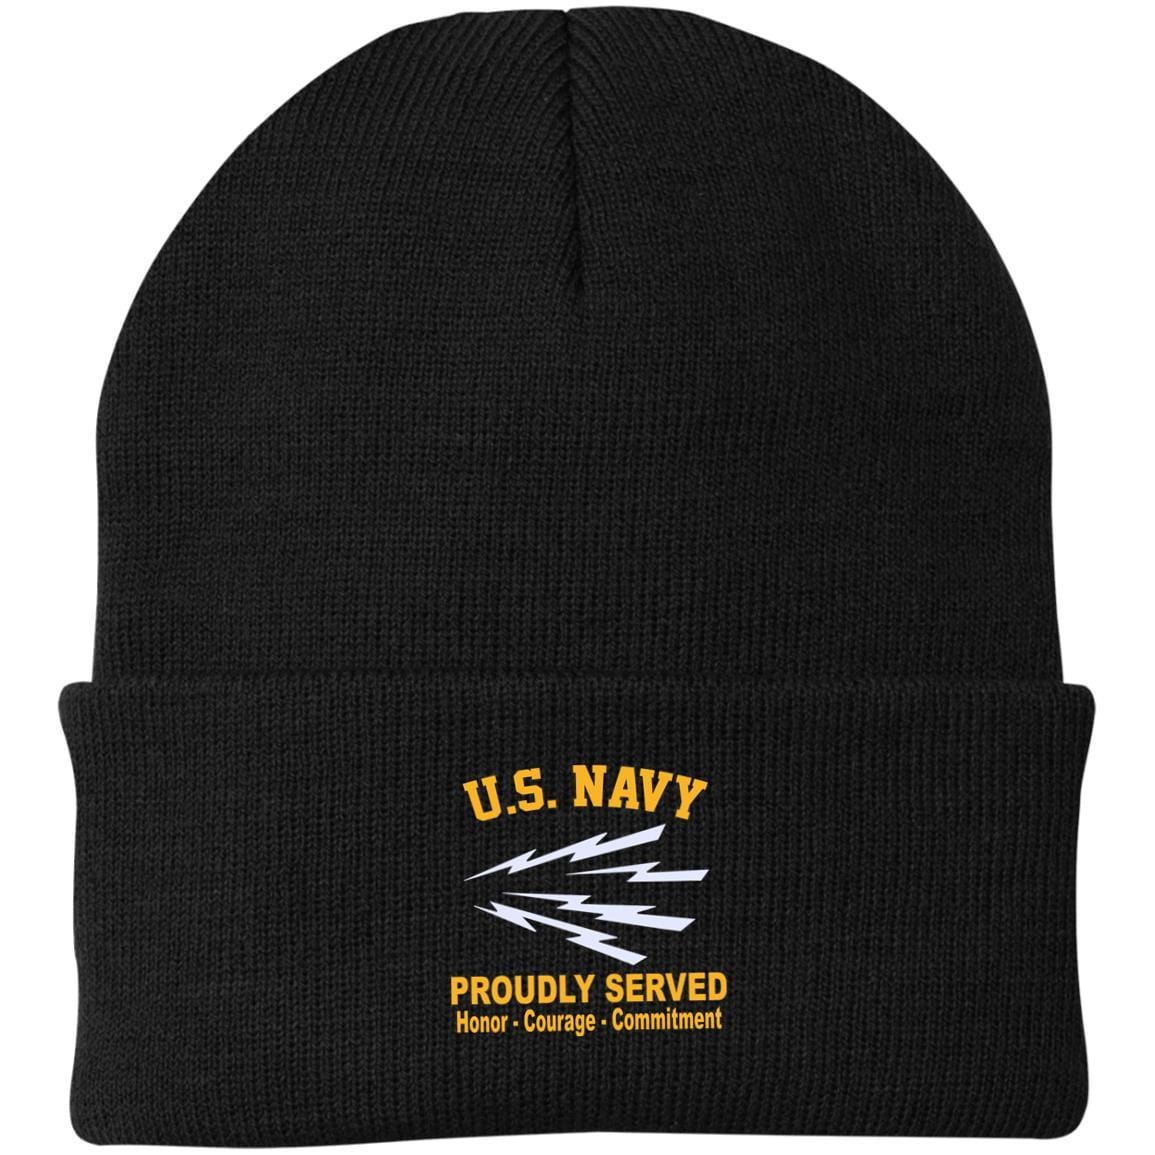 hats by us navy rank